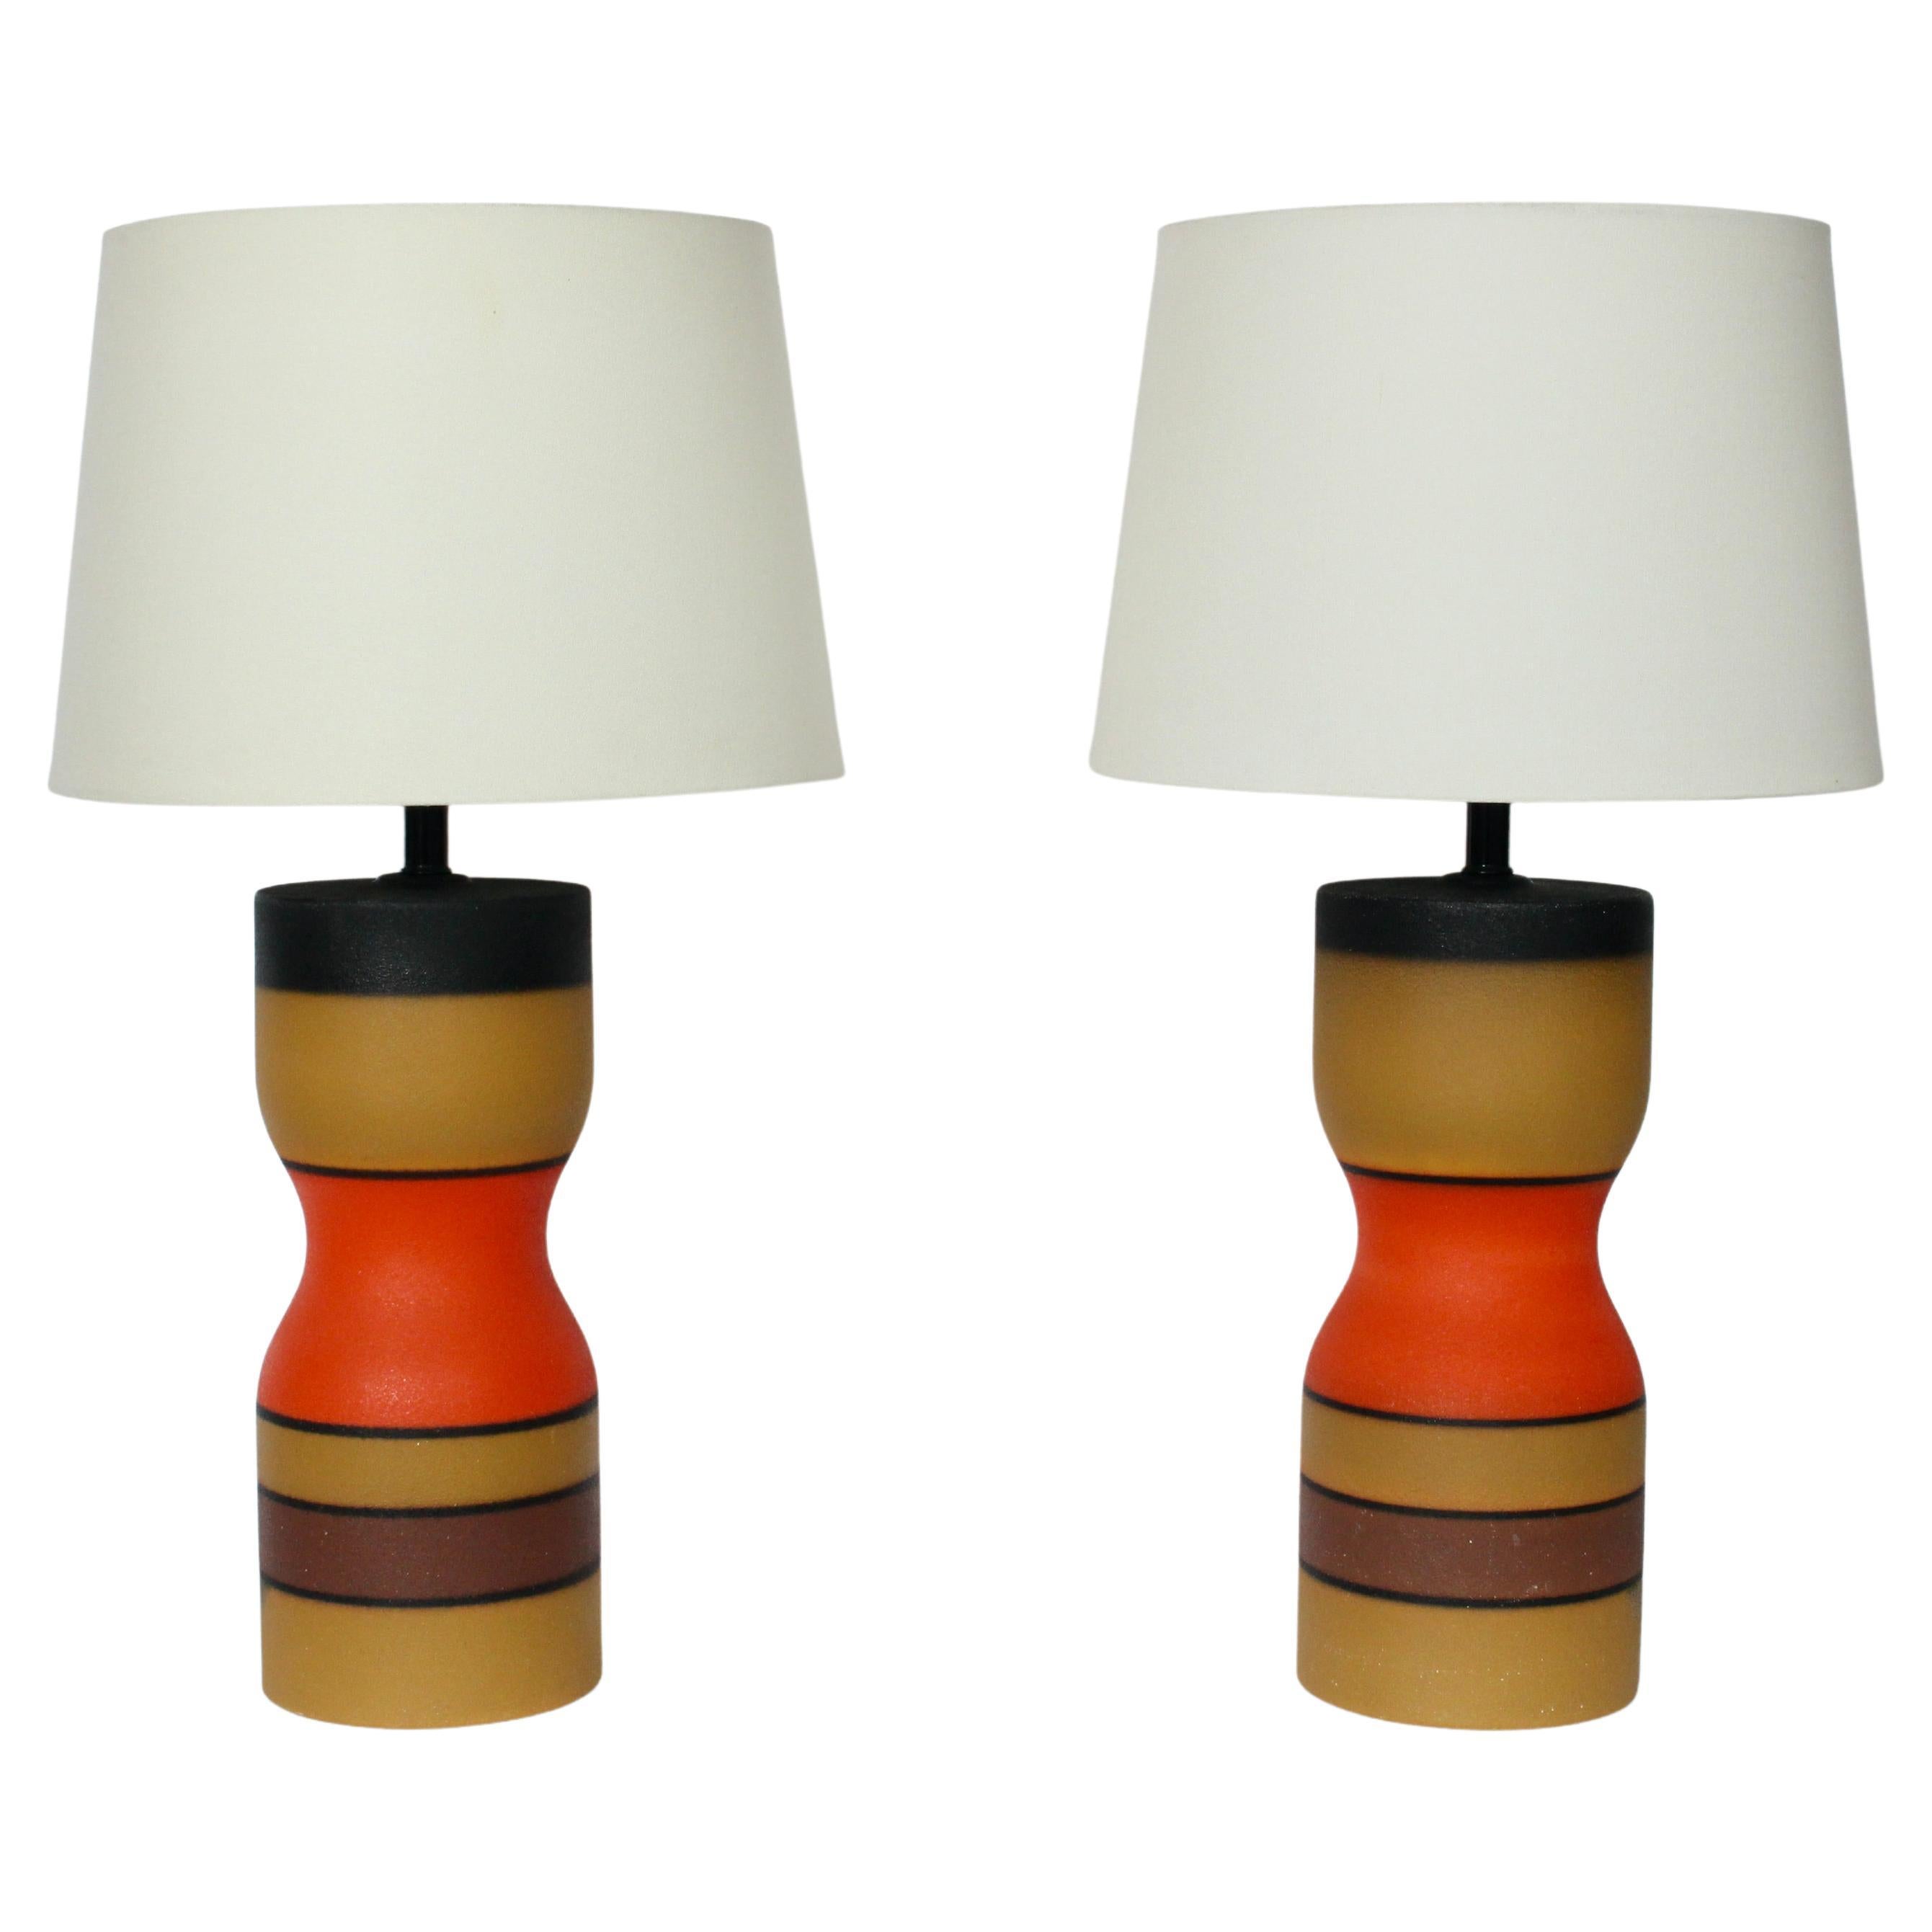 Pair of Bruno Gambone style Bright Banded Modern Hourglass Pottery Table Lamps